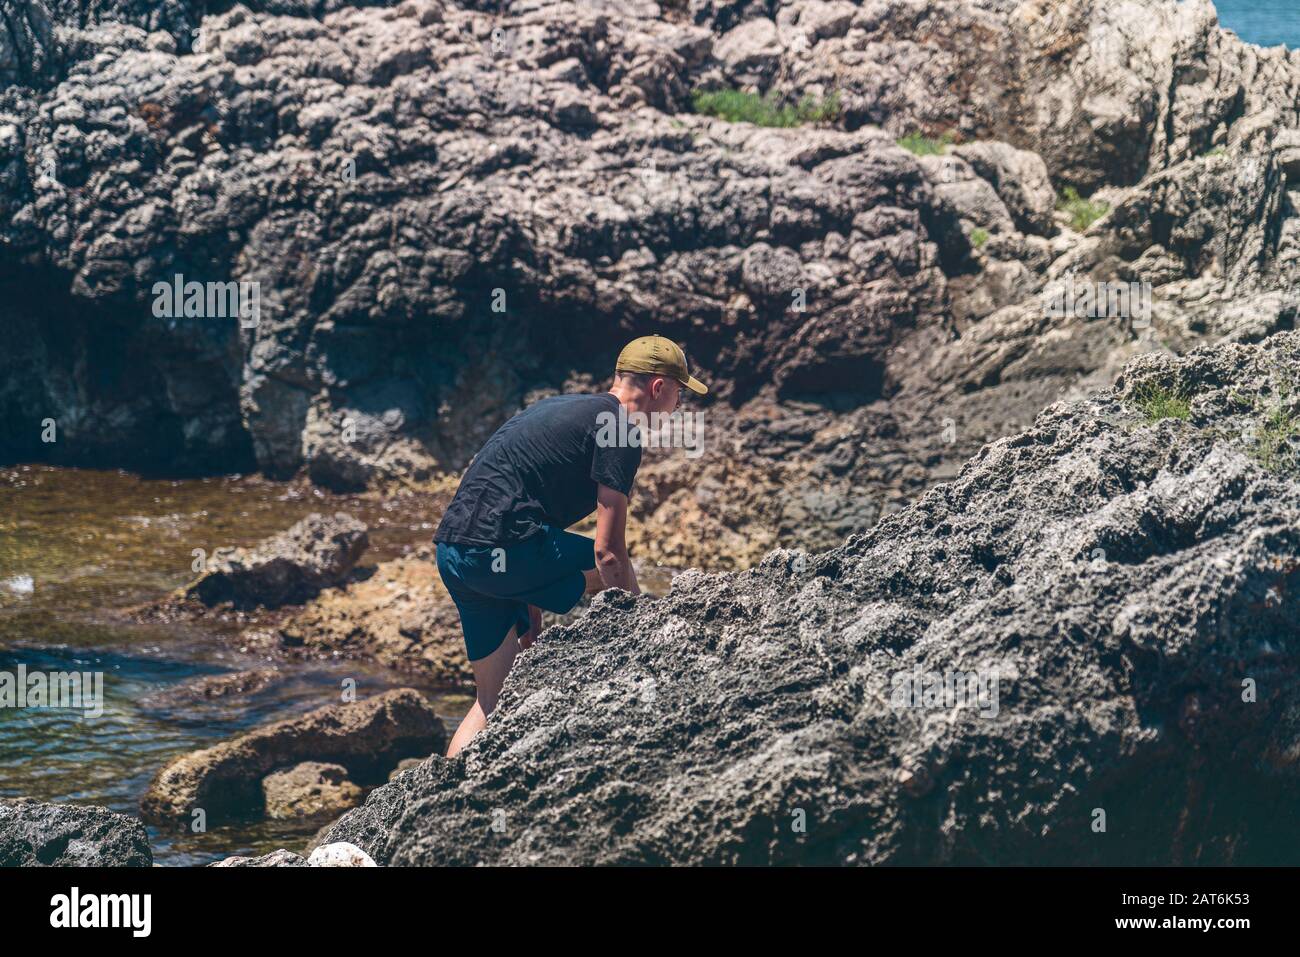 https://c8.alamy.com/comp/2AT6K53/young-man-with-baseball-cap-climbs-through-the-sharp-rocks-by-the-sea-2AT6K53.jpg